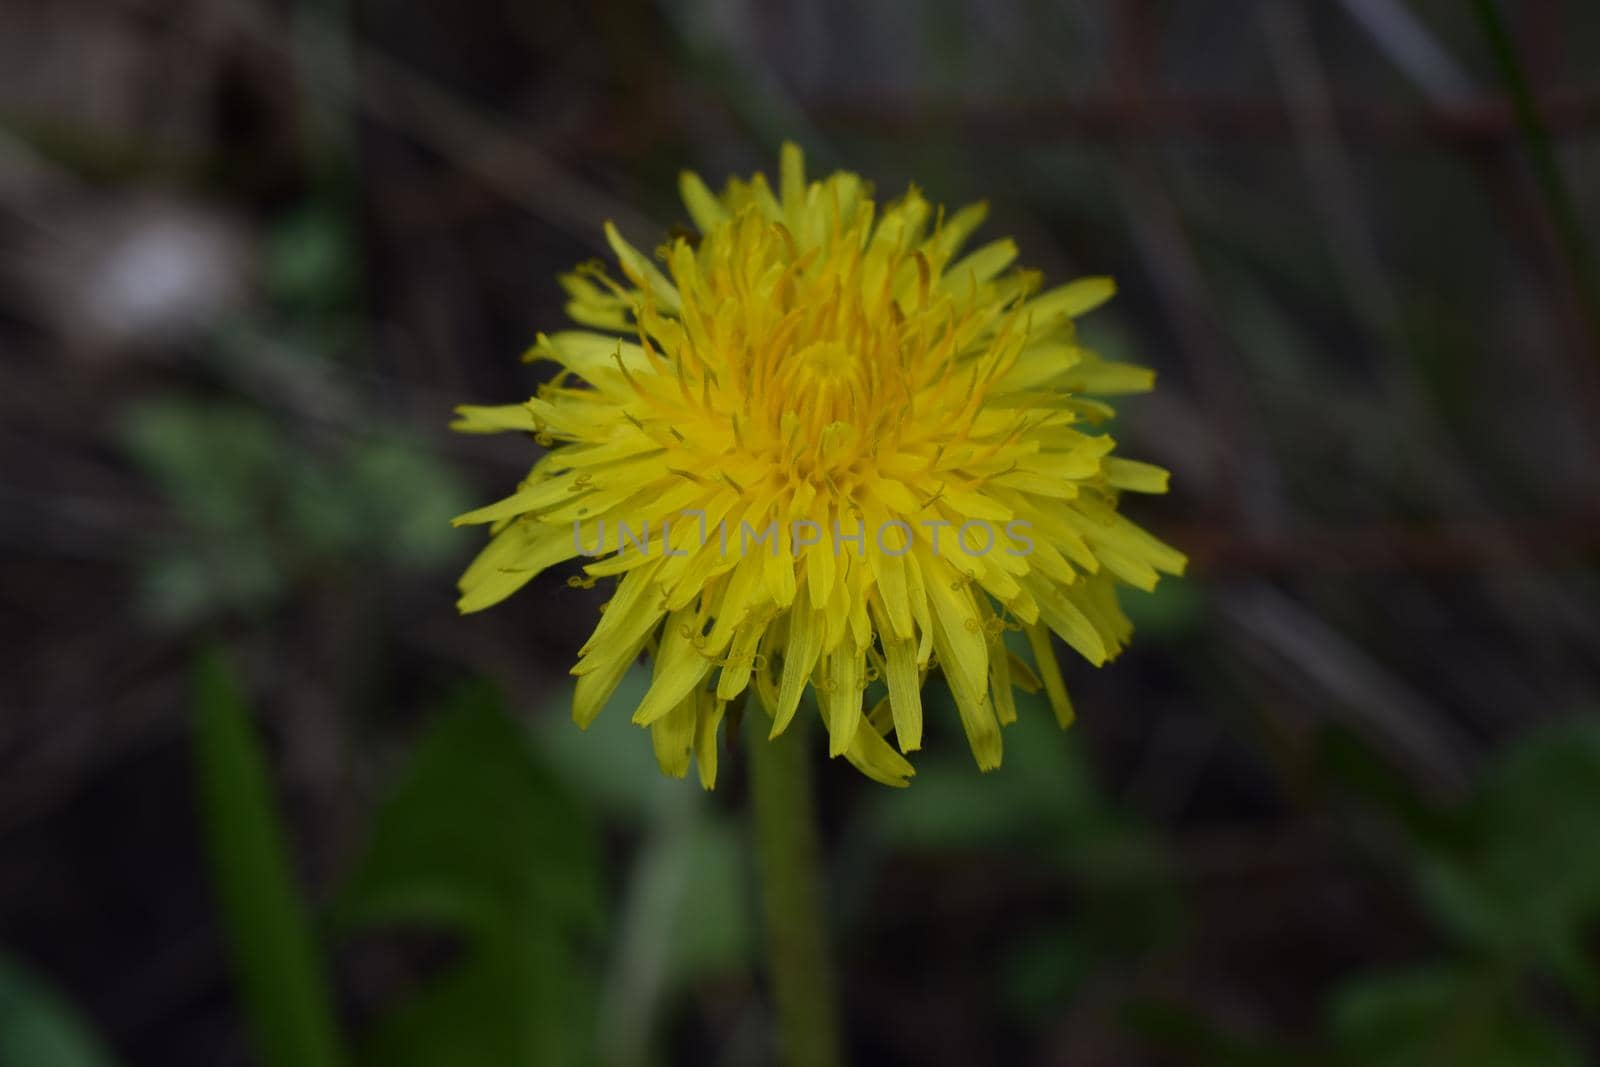 Dandelion in Grass. Macro Photo of a dandelion plant with a fluffy yellow bud. Yellow dandelion flower growing in the ground.